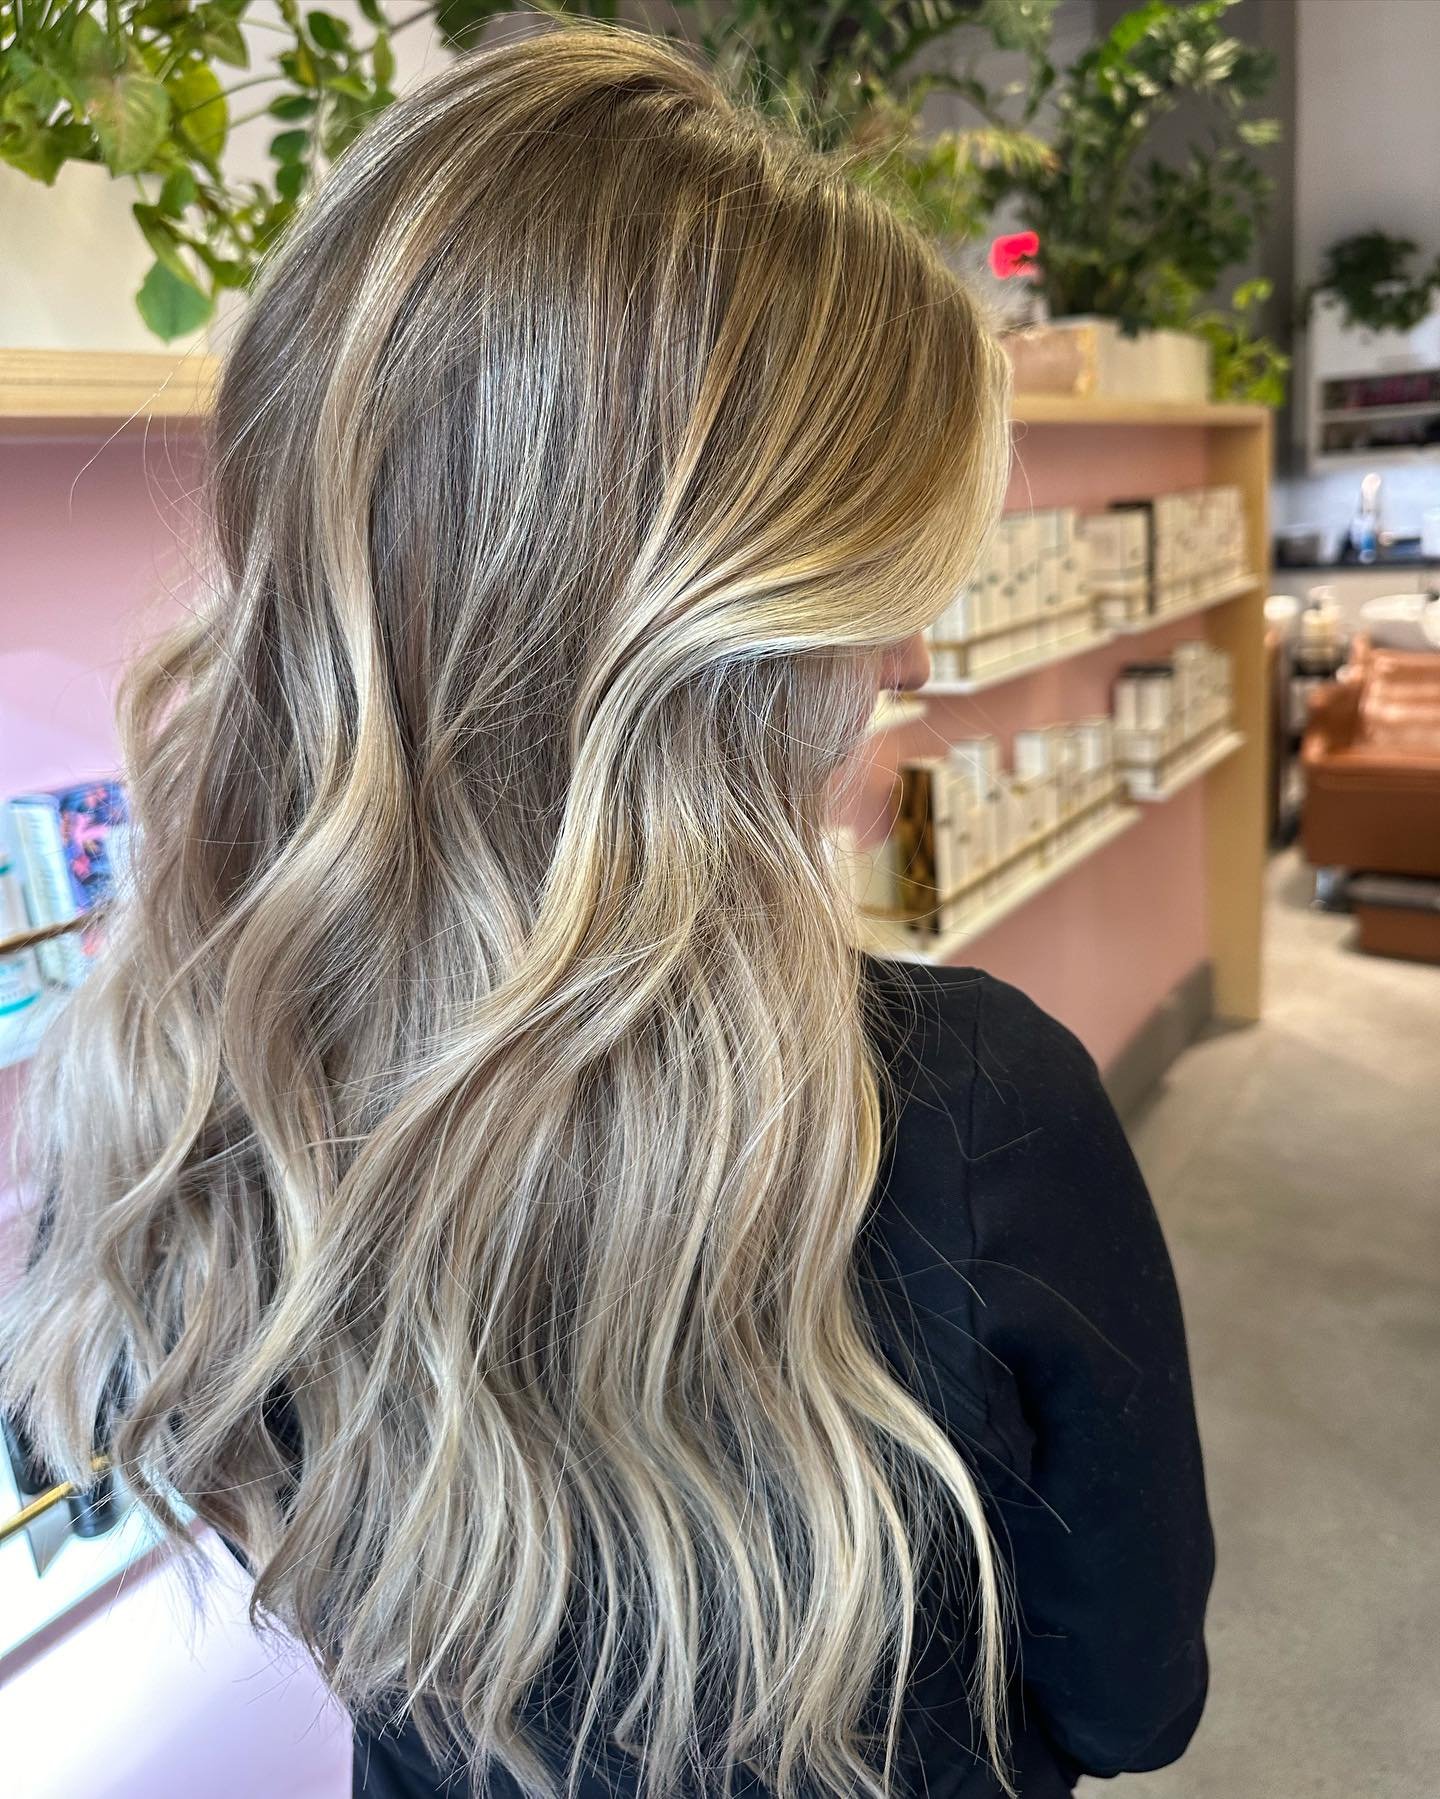 Holiday hair is here! Get brightened up before the parties and fun begin! 

Whether you need a fresh chop, a gloss for shimmer or those pesky greys gone- we got ya covered!😉

Book an appointment right at the link in our bio. ‼️

(🌟Beautiful blonde 